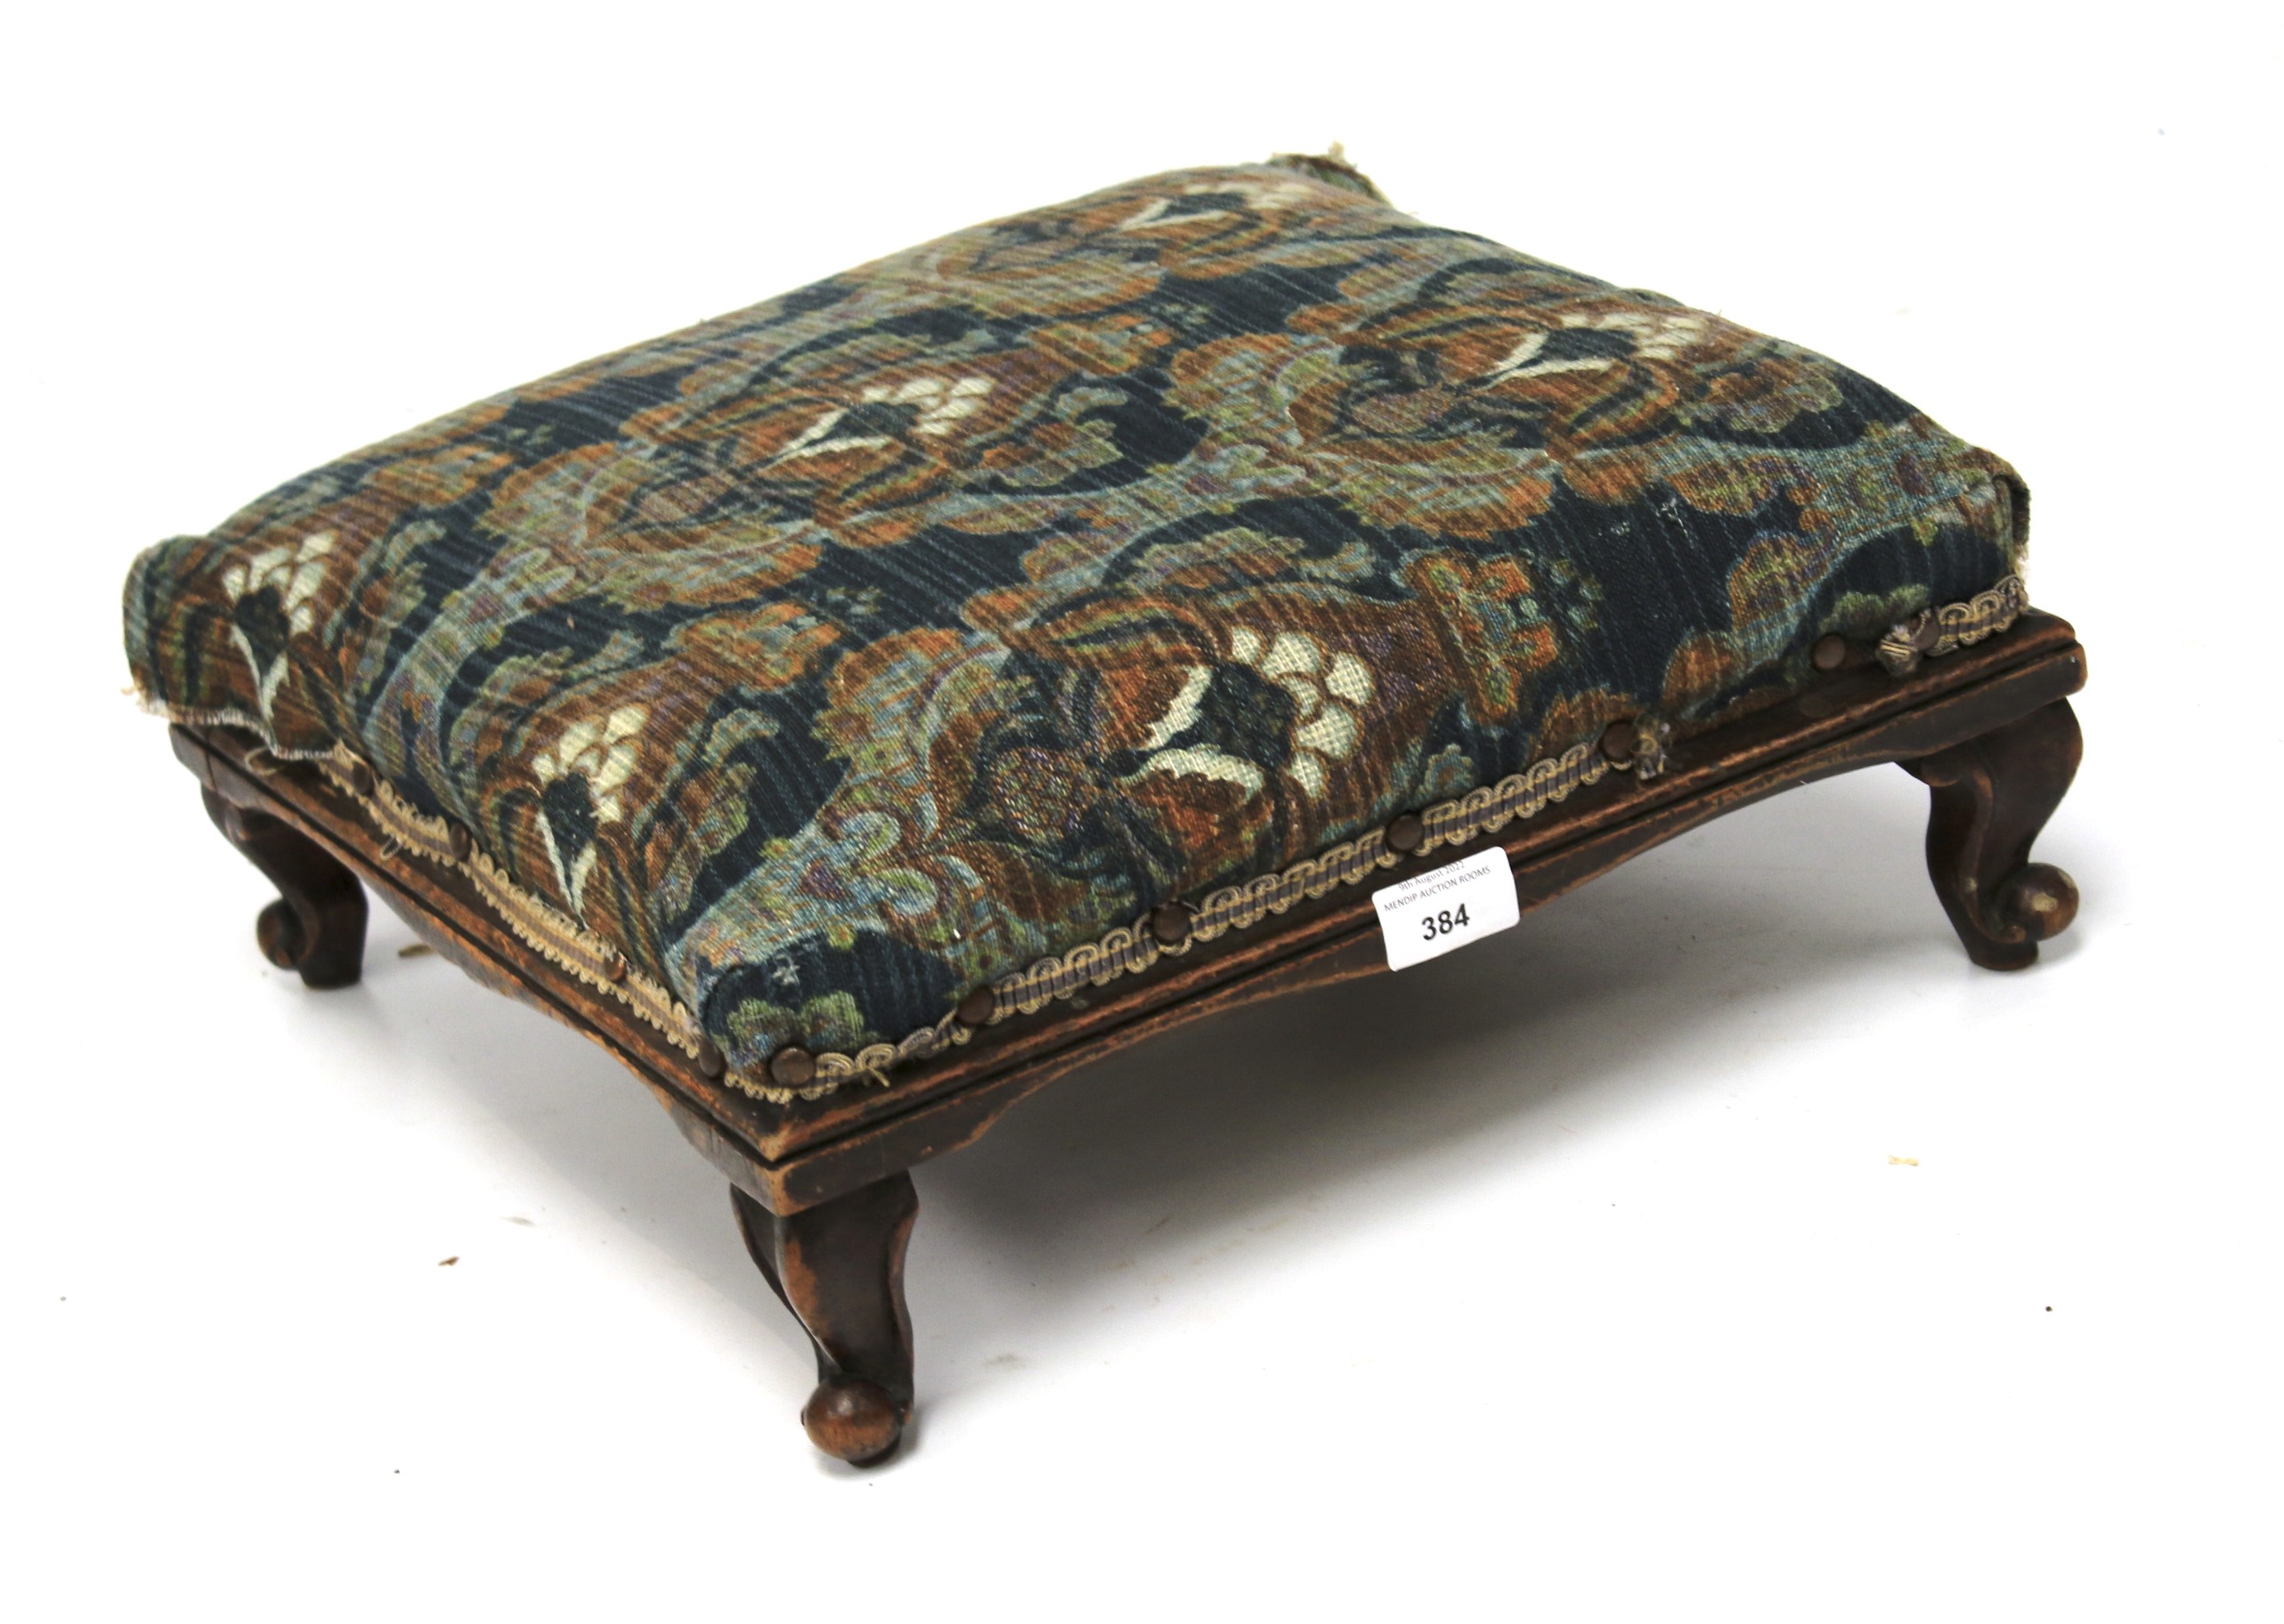 An upholstered footstool.